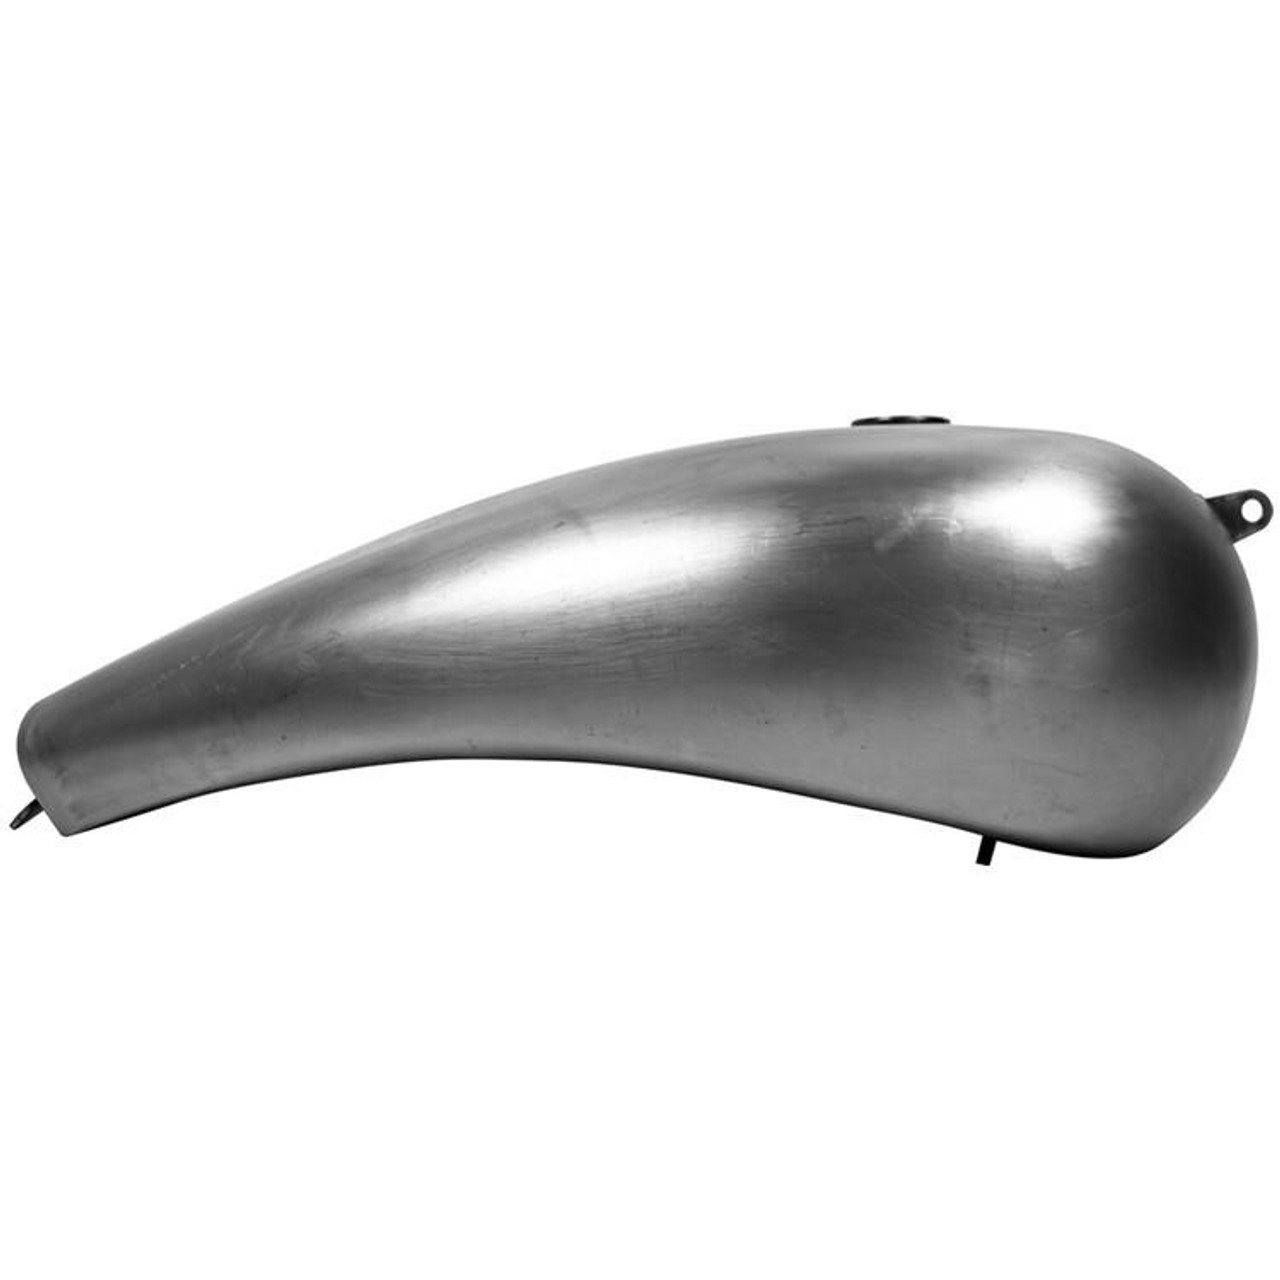 Kodlin 3.5 Gallon Stretched Gas Tank fits M8 Softail Models